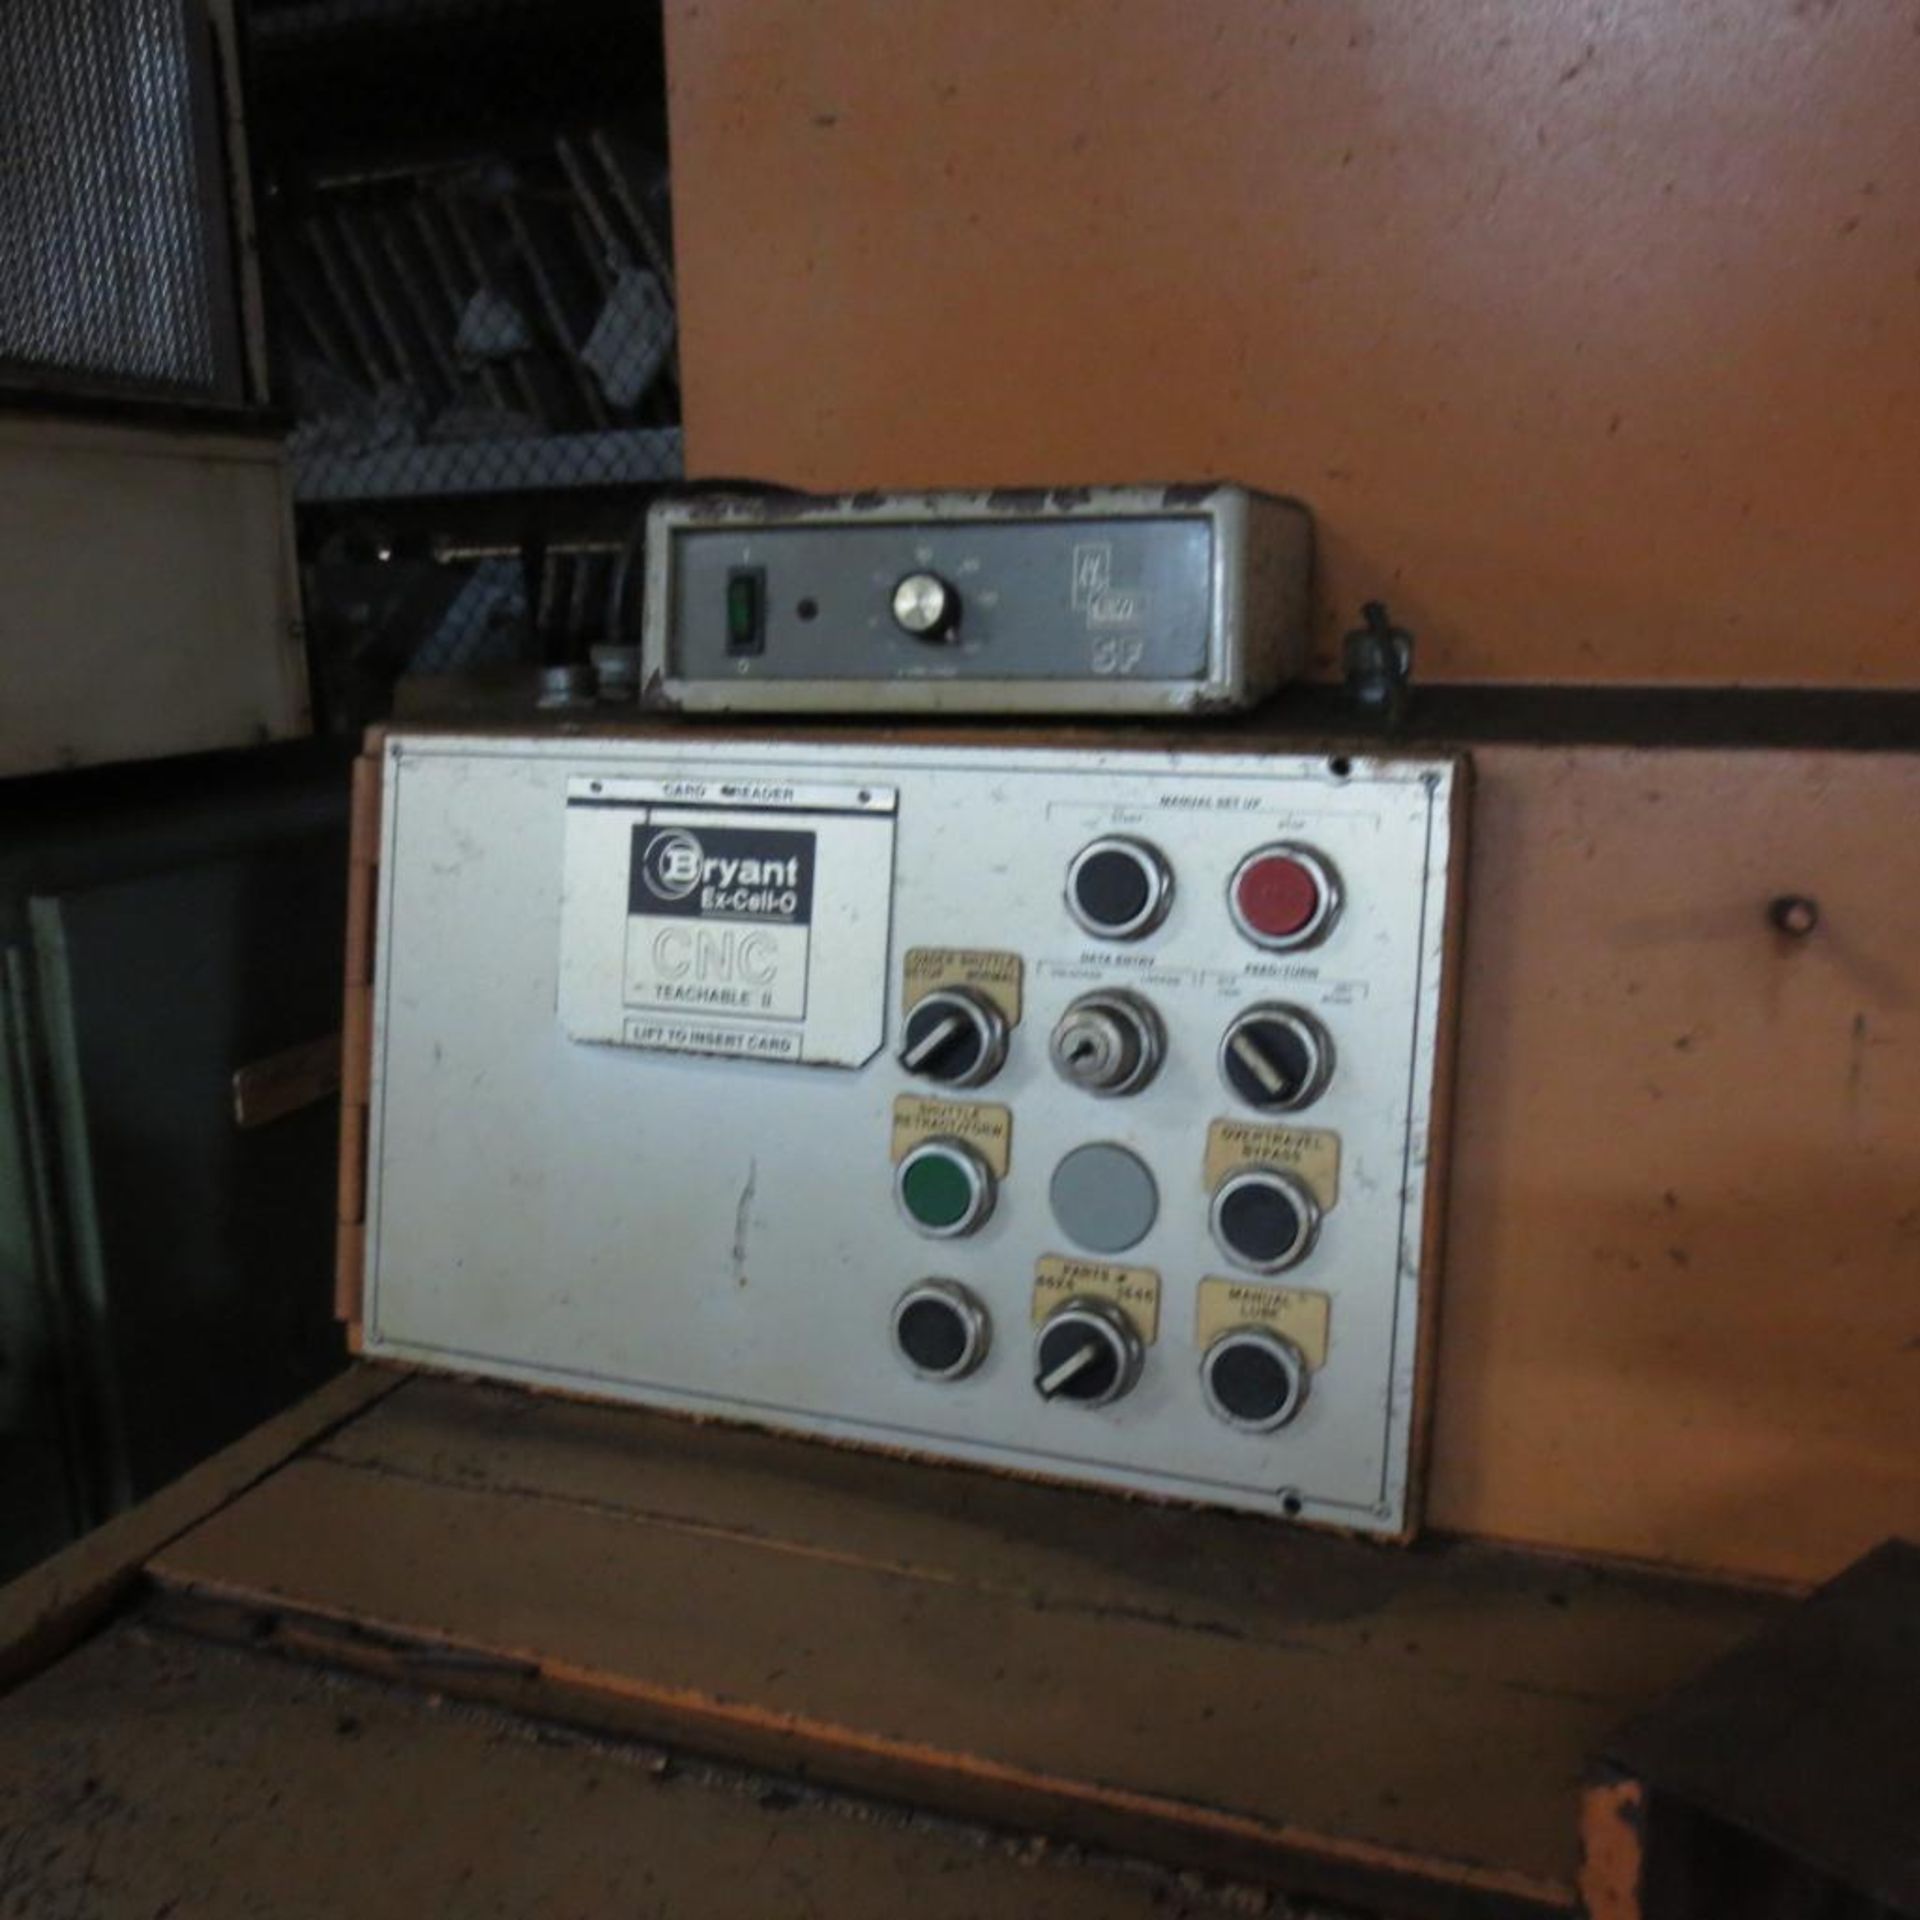 Bryant EX-Cell-0 LL1 CNC Grinder, S/N W-16891. Loading Fee is $350.00 - Image 4 of 12